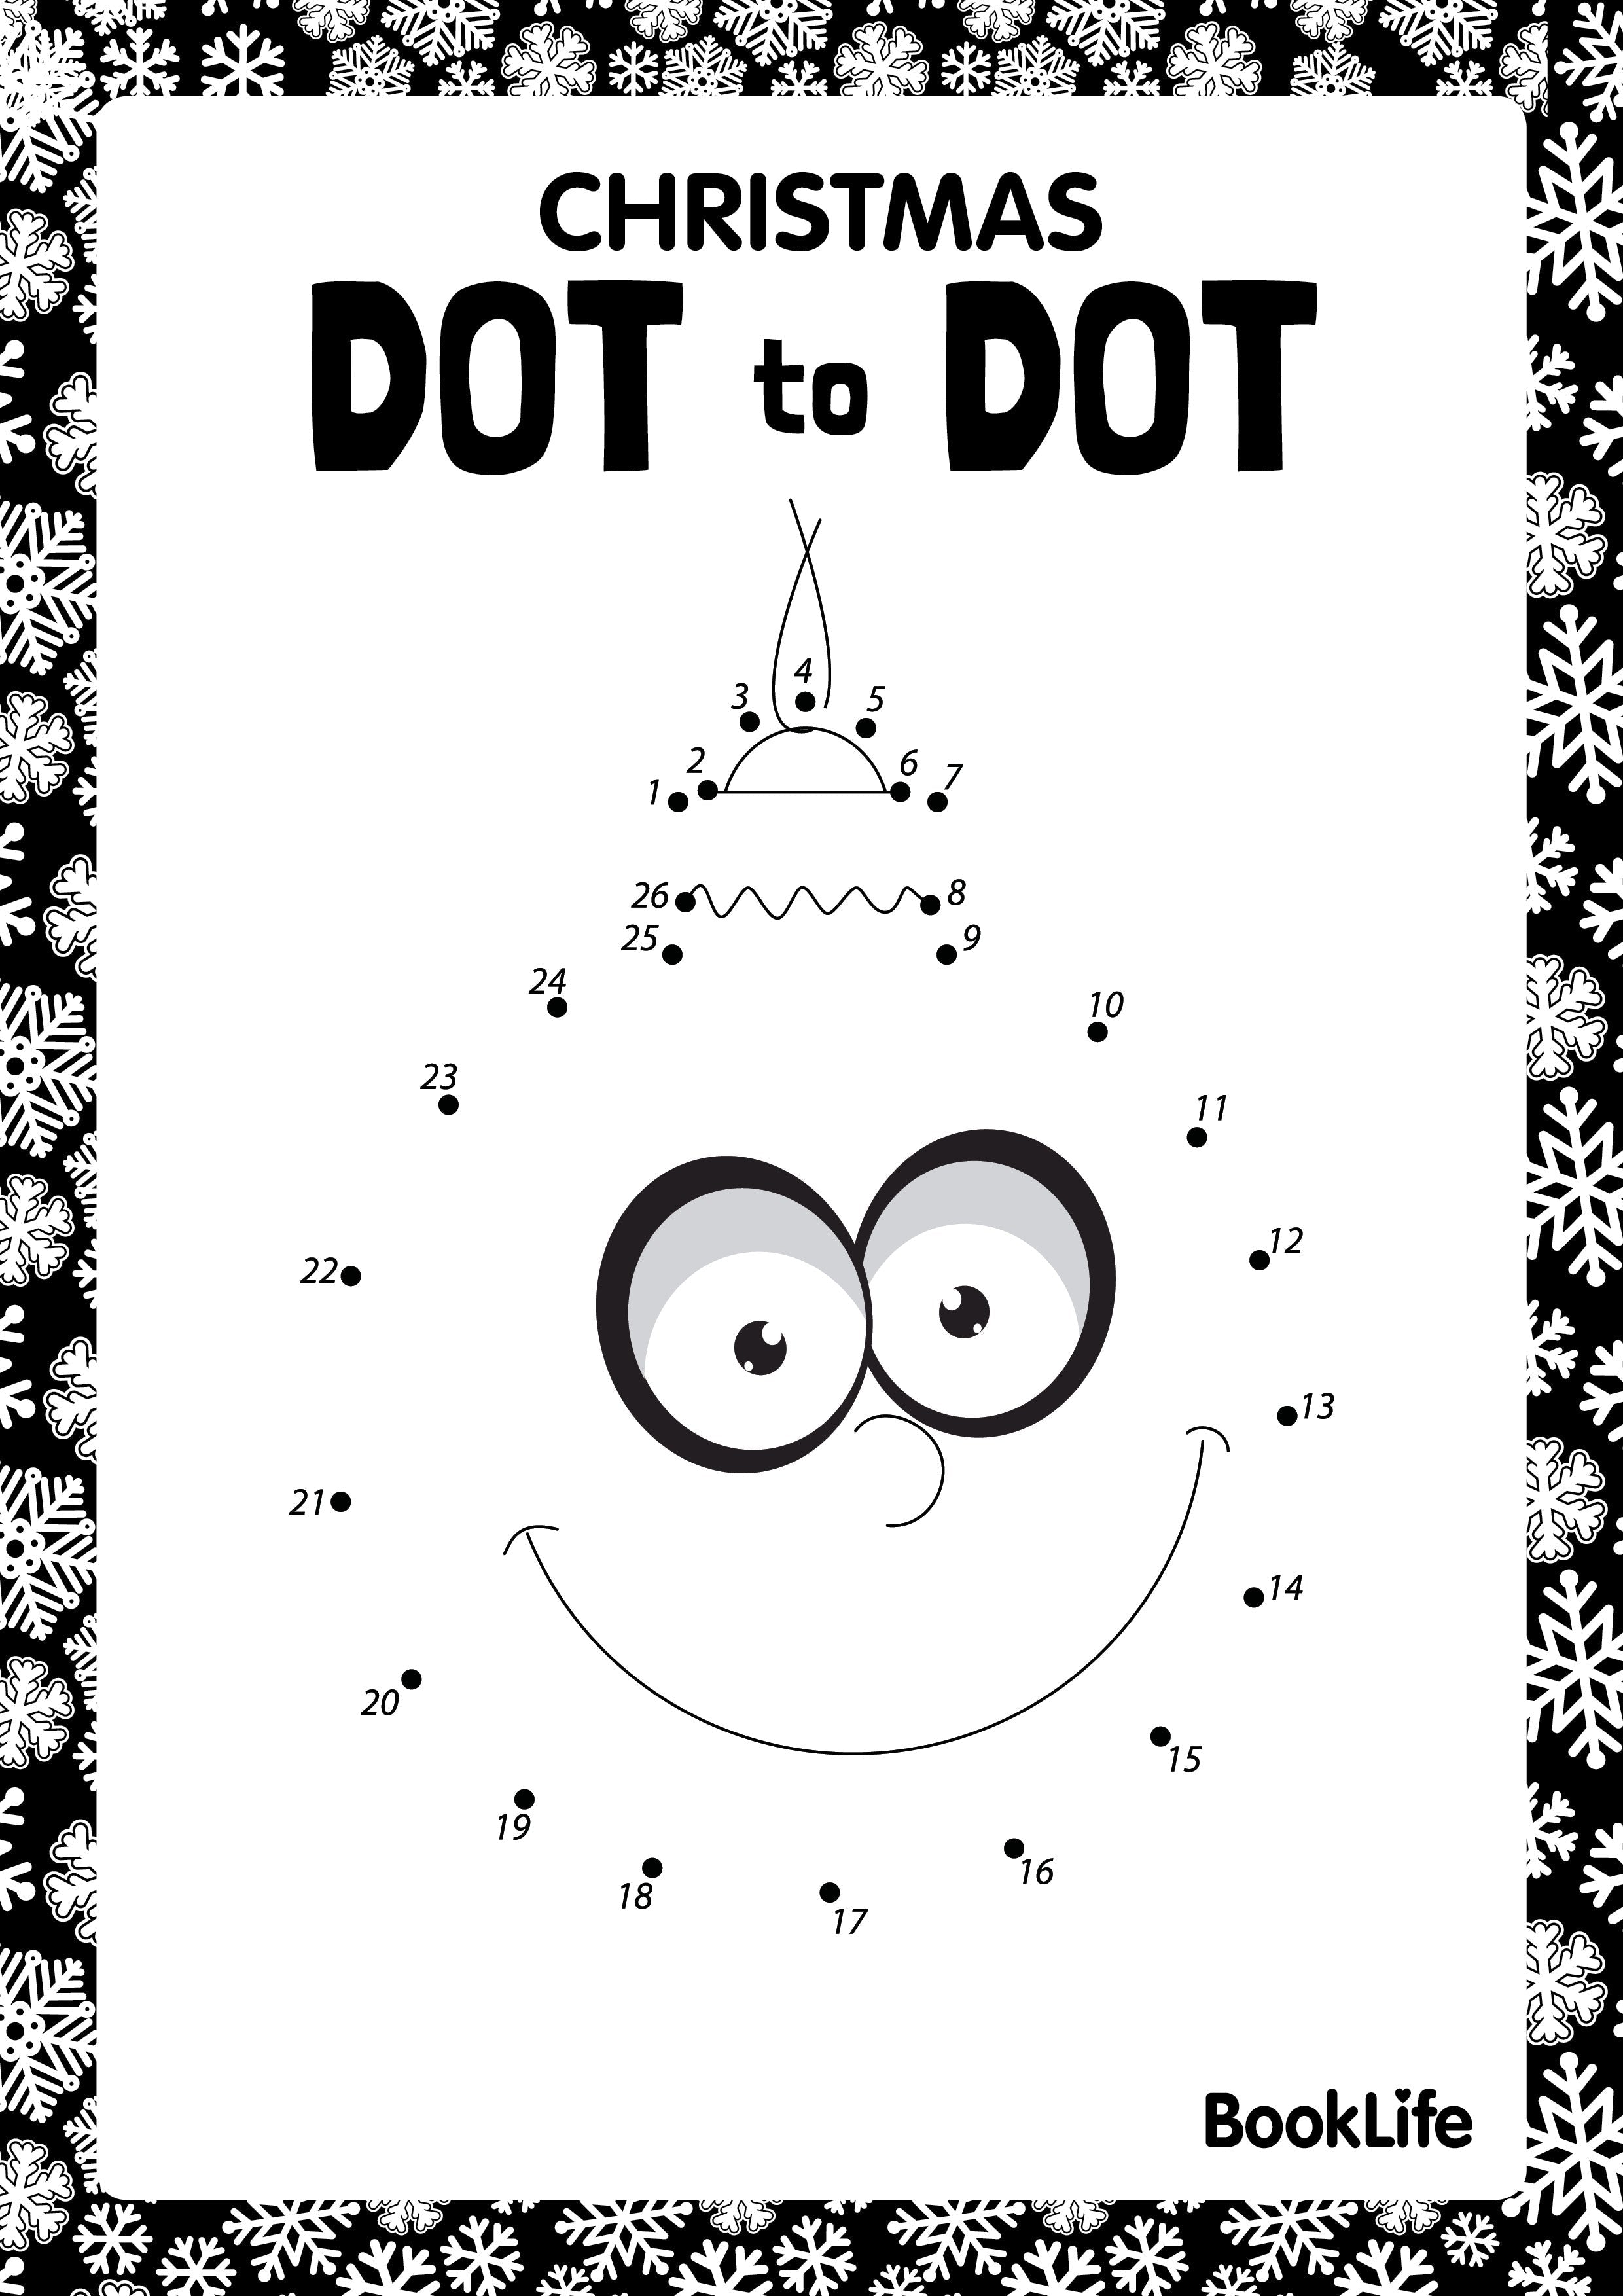 Free Christmas Dot-to-Dot by BookLife